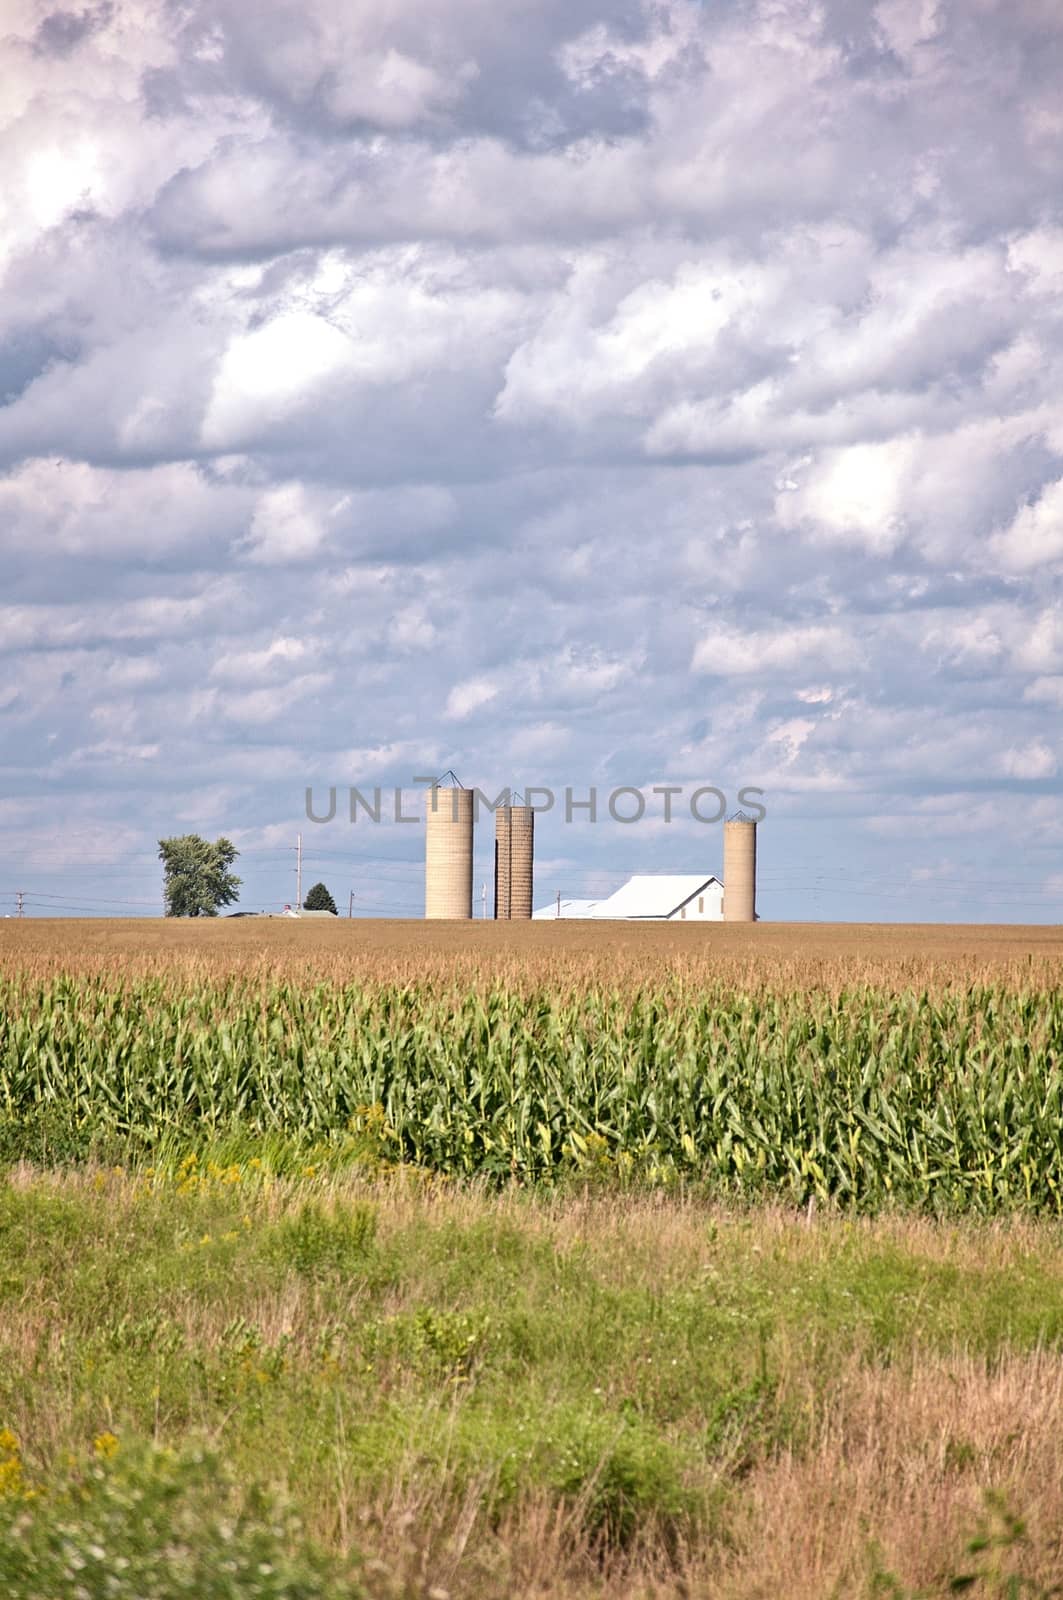 A famiy farm on sunny day with a corn crop waiting to be harvested later on in the season.